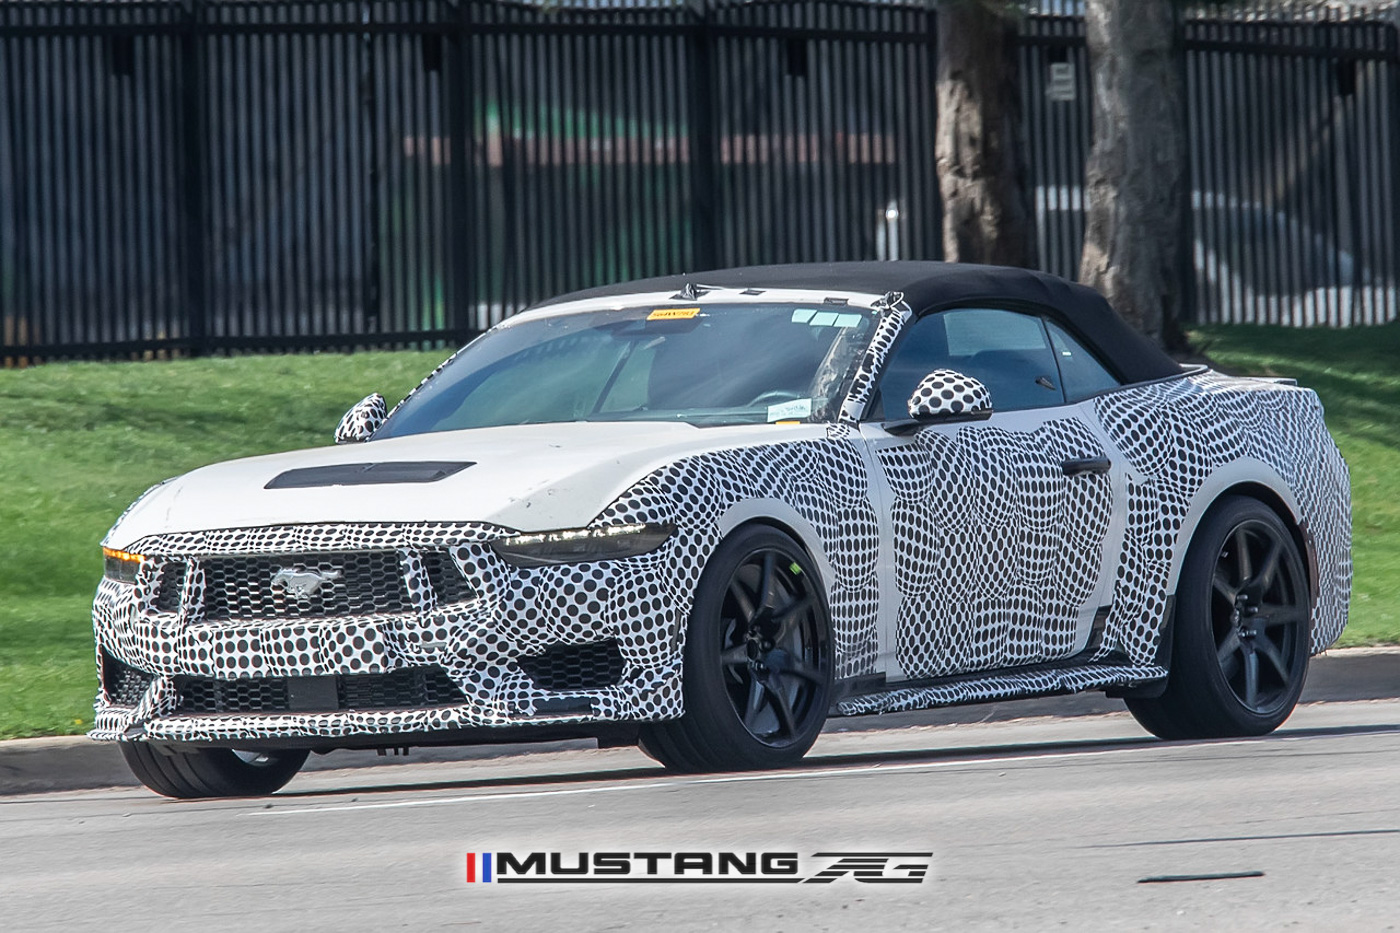 S650 Mustang Speculations for Models Between Dark Horse and GTD? Shelby GT500 2